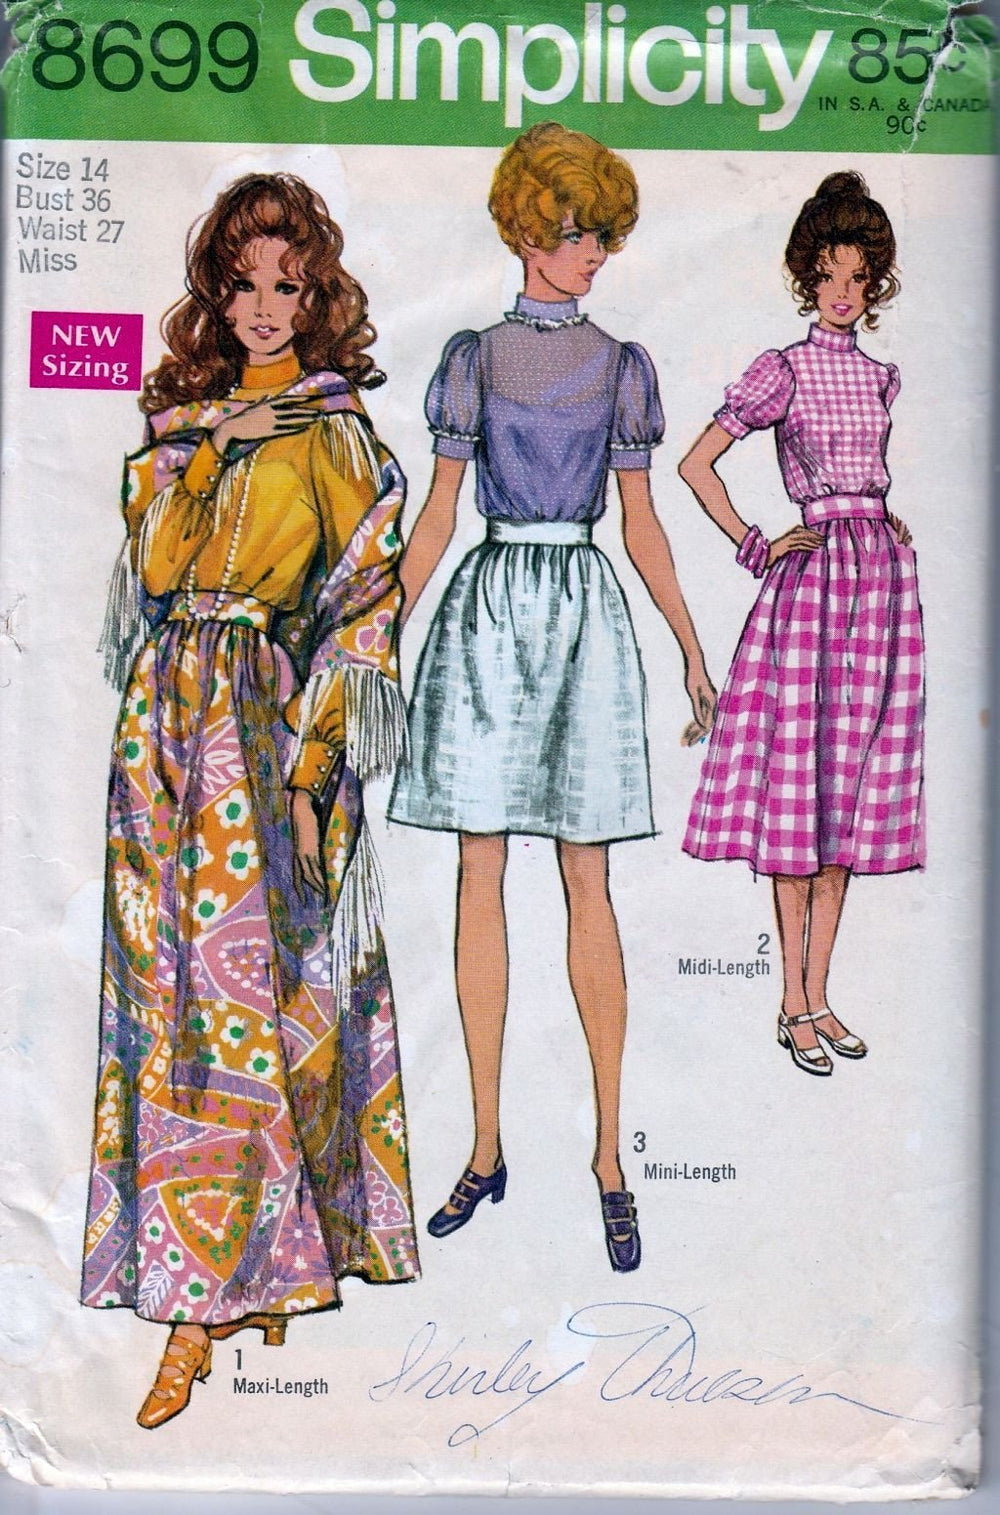 Vintage 70s/80s Sewing Patterns/ Vintage Sewing//70s Dress/ 80s Outfits/  Patterns/ 